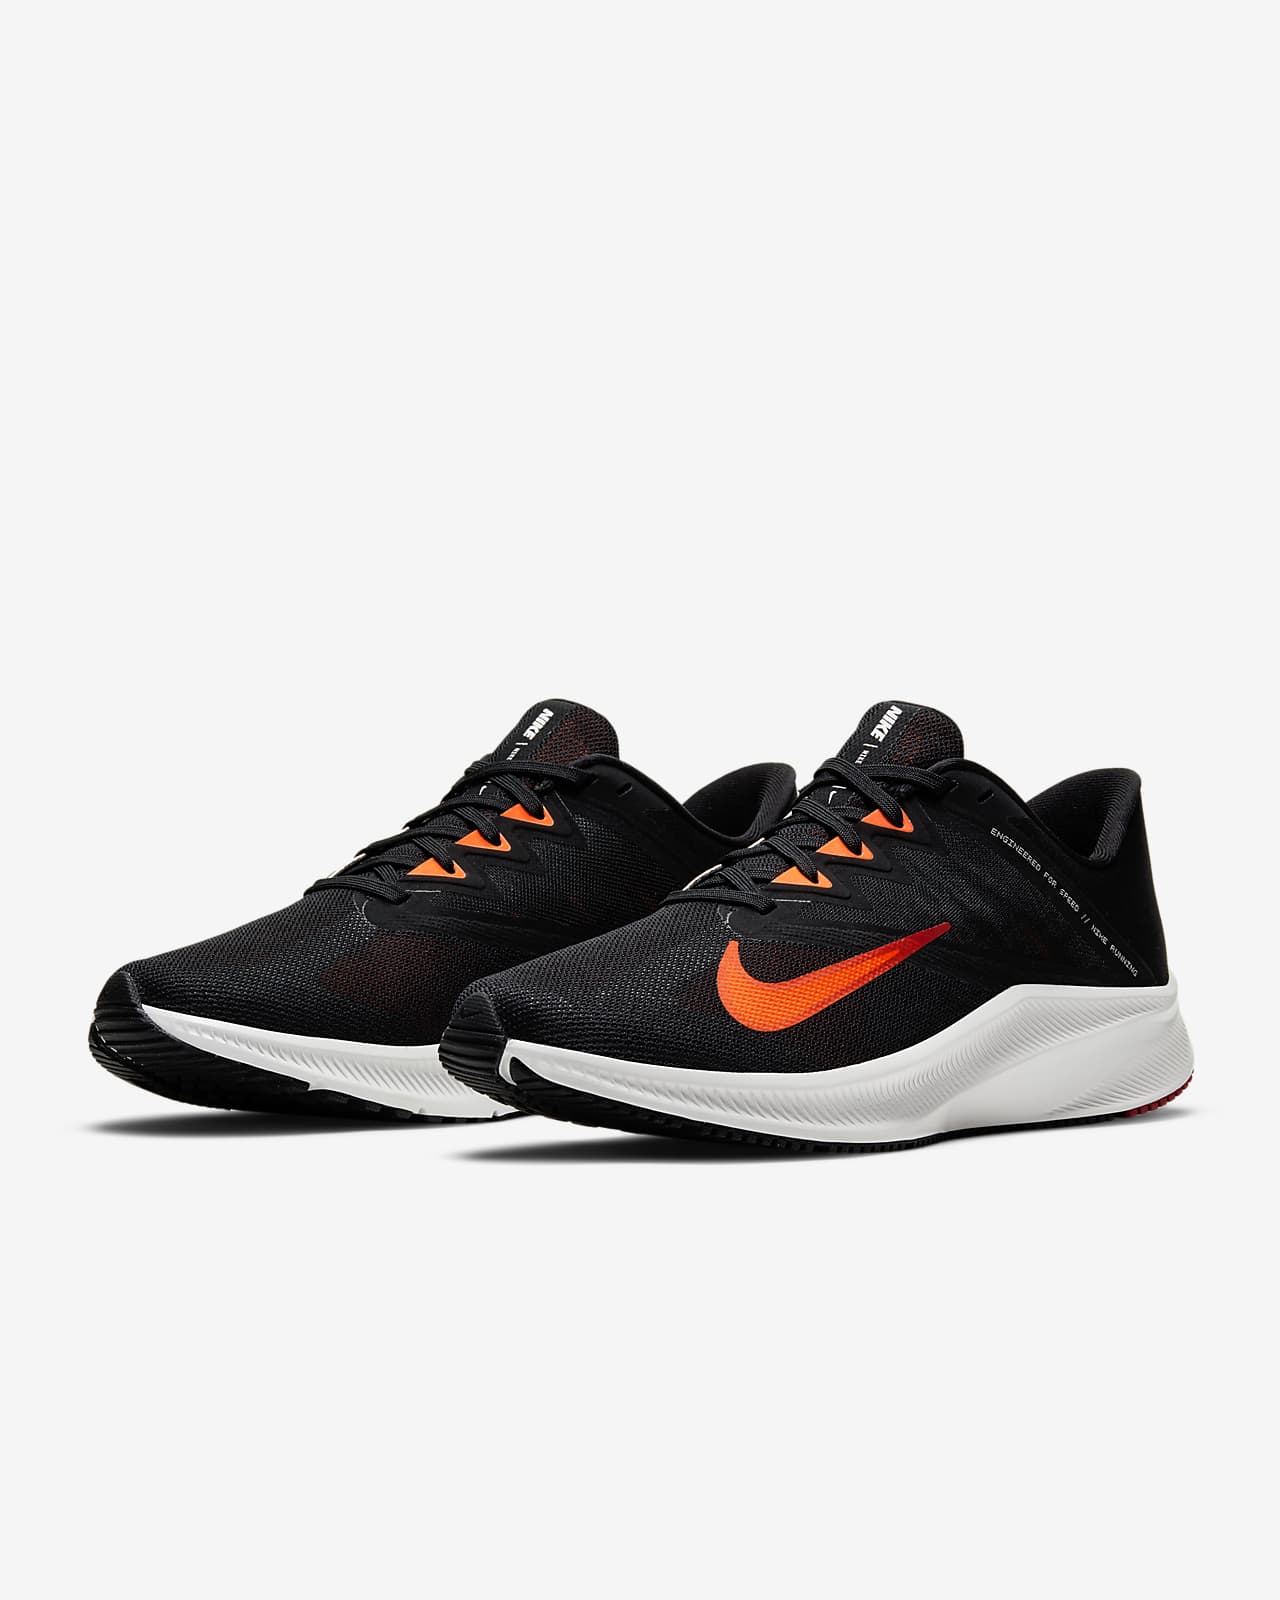 nike quest 1.5 review